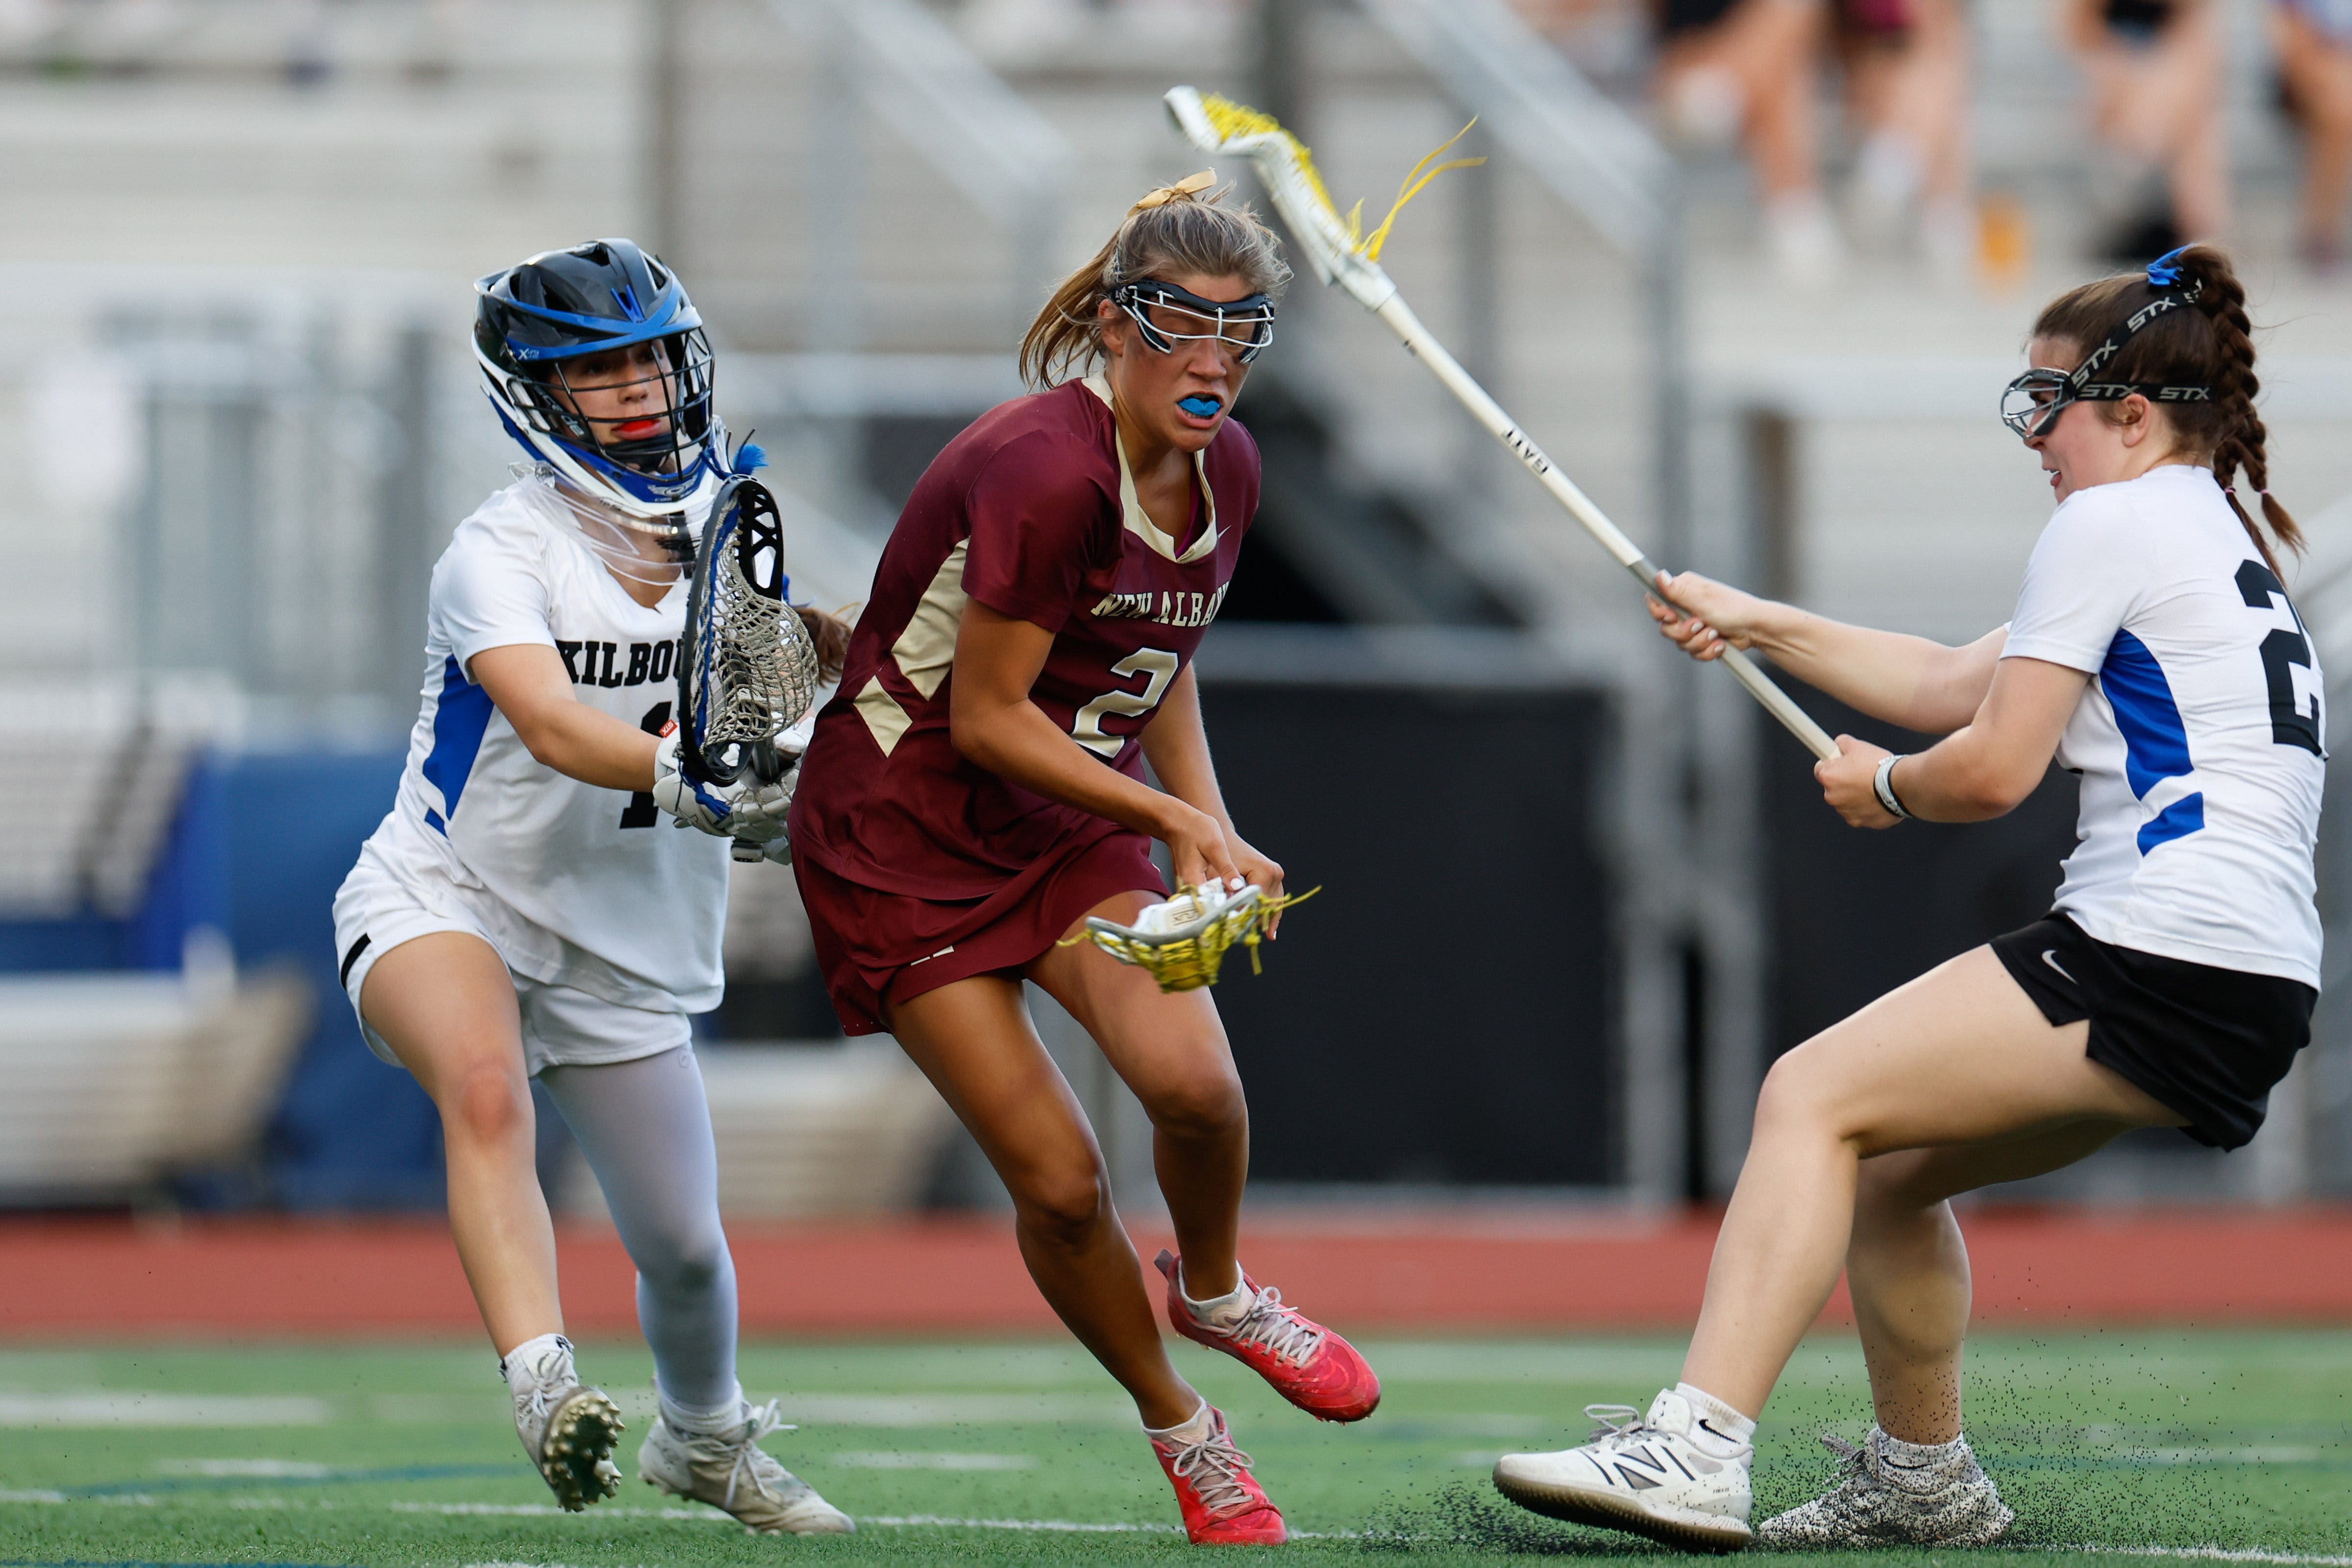 Vote for the Greater Columbus high school girls lacrosse regular season player of the year